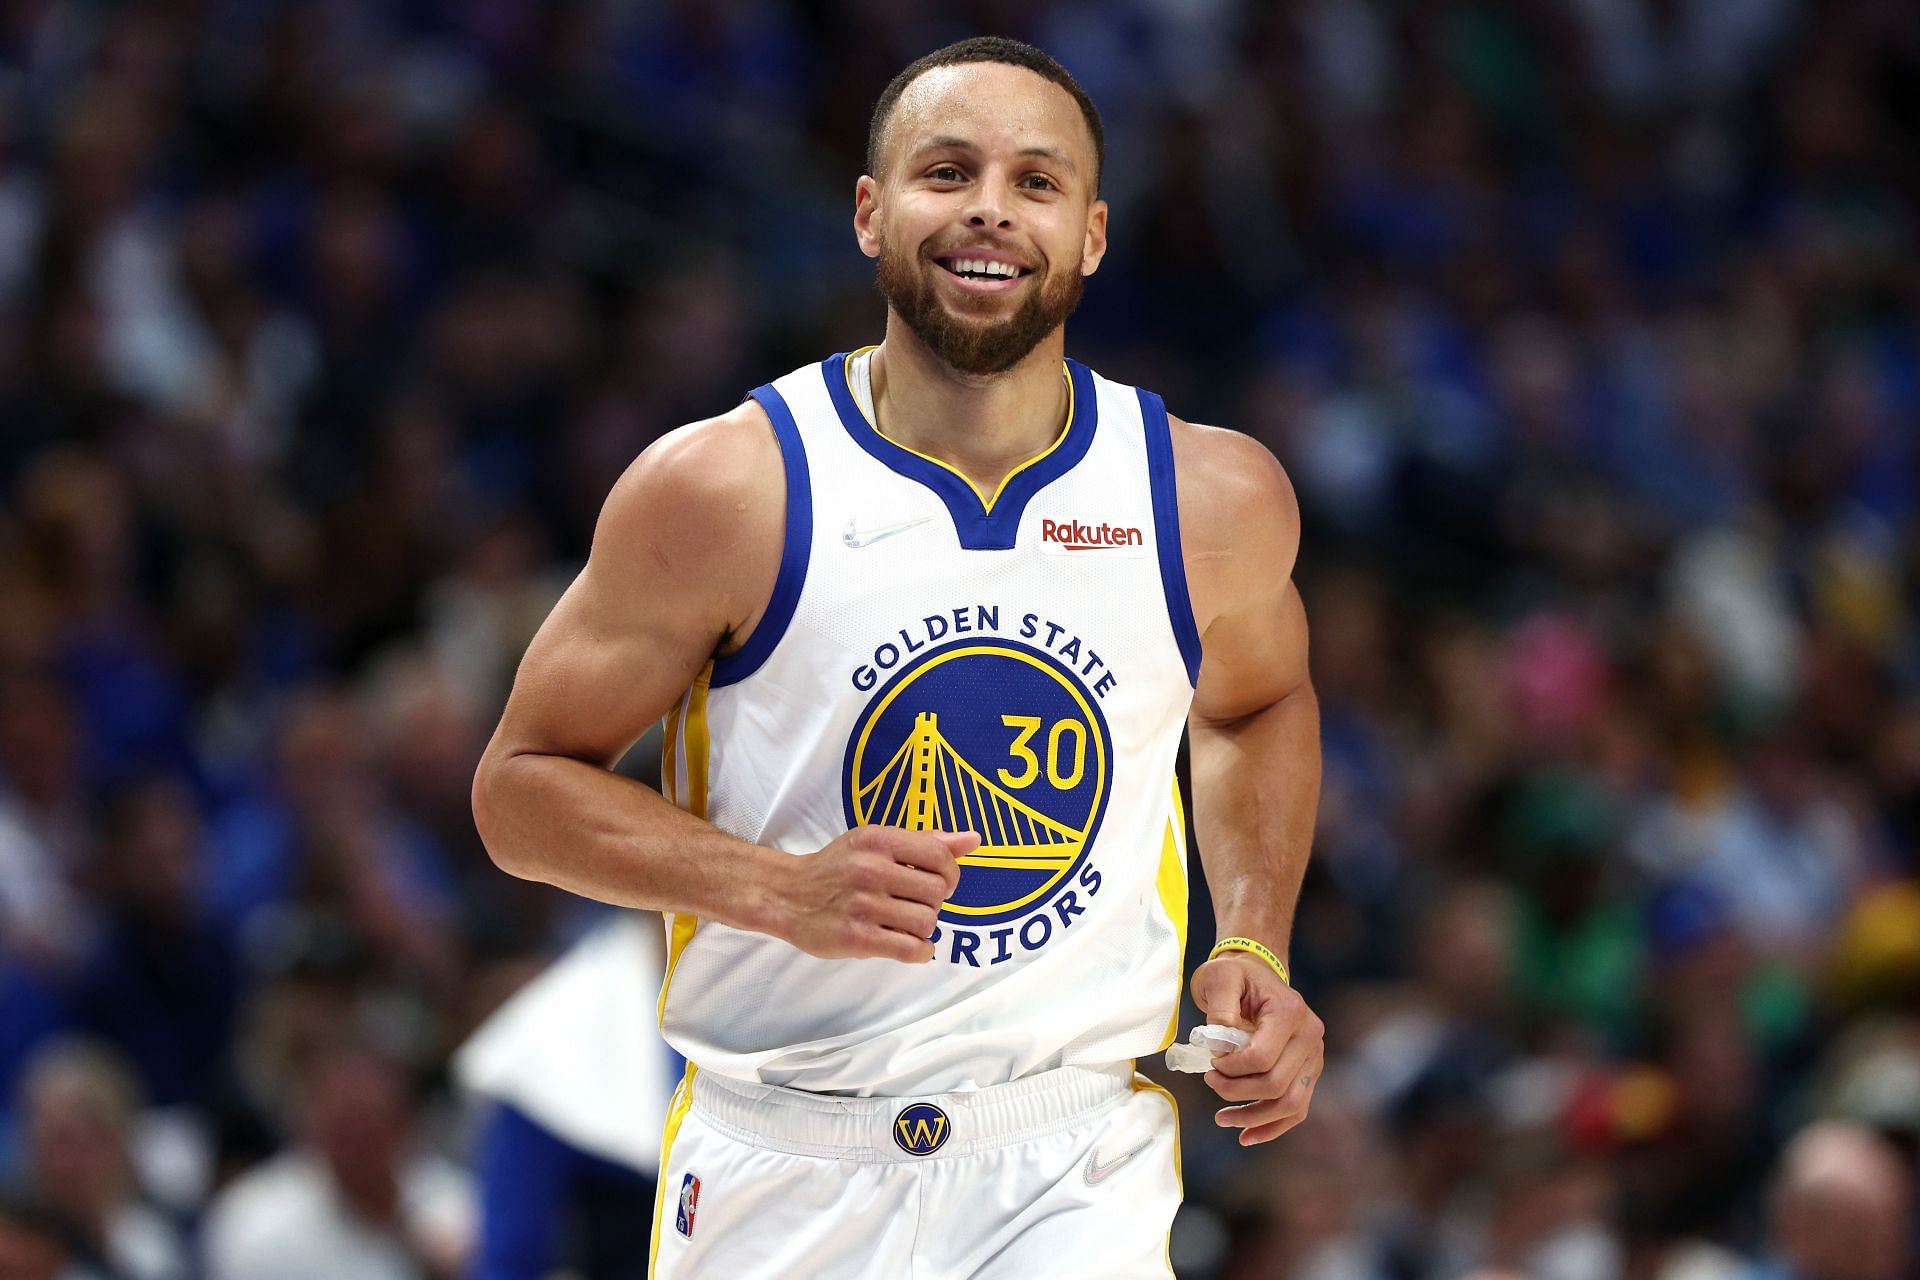 Steph Curry of the Golden State Warriors in the 2022 NBA Western Conference Finals